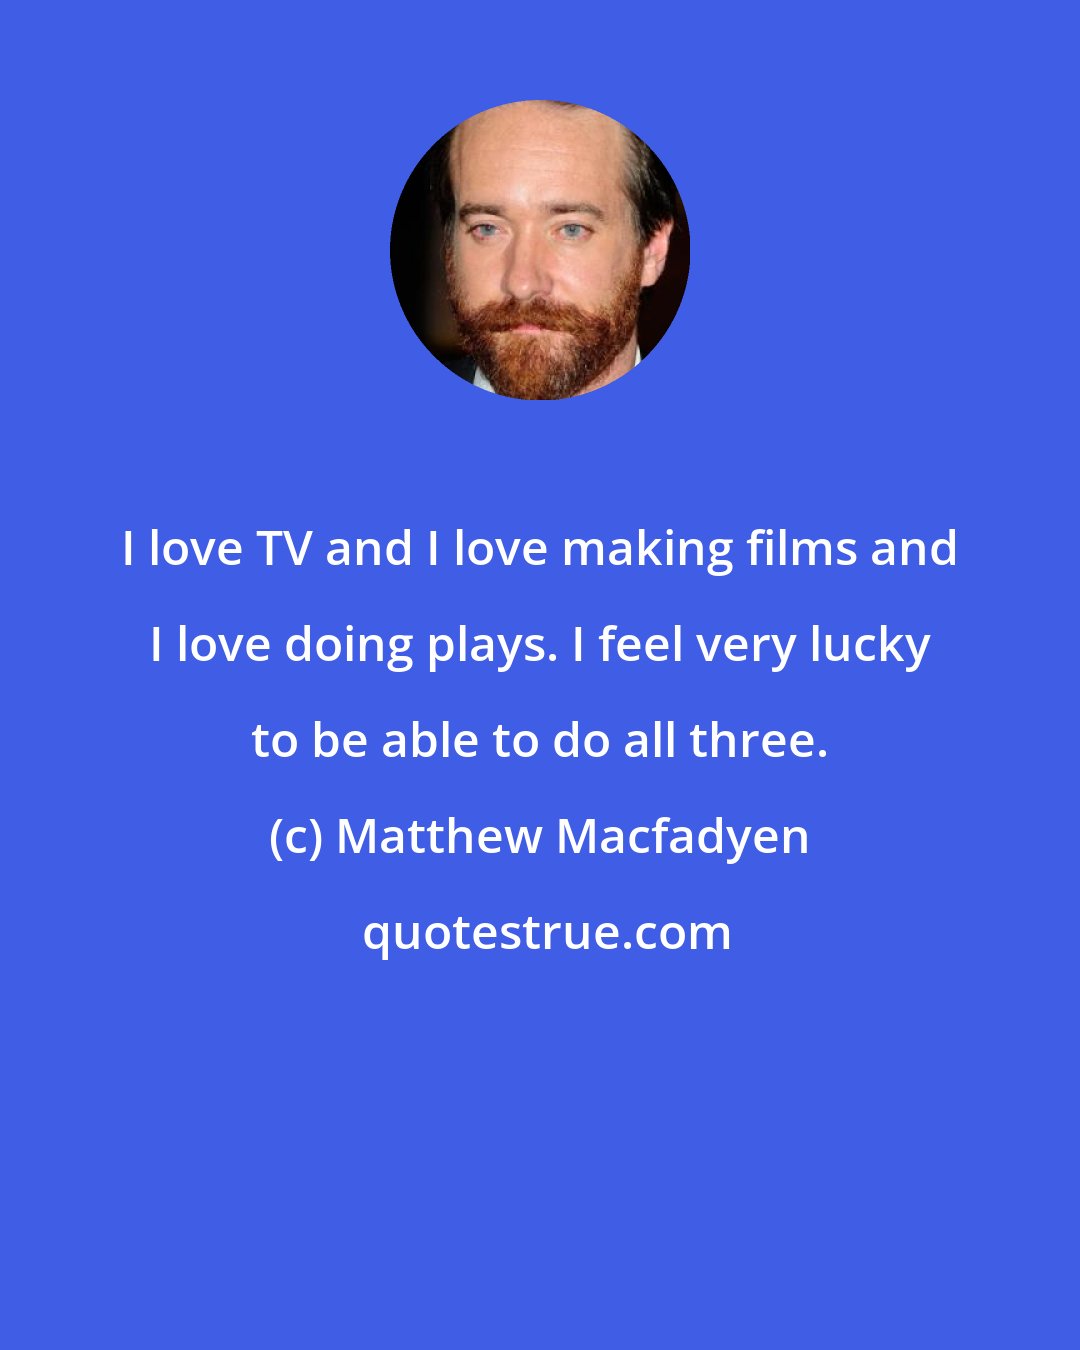 Matthew Macfadyen: I love TV and I love making films and I love doing plays. I feel very lucky to be able to do all three.